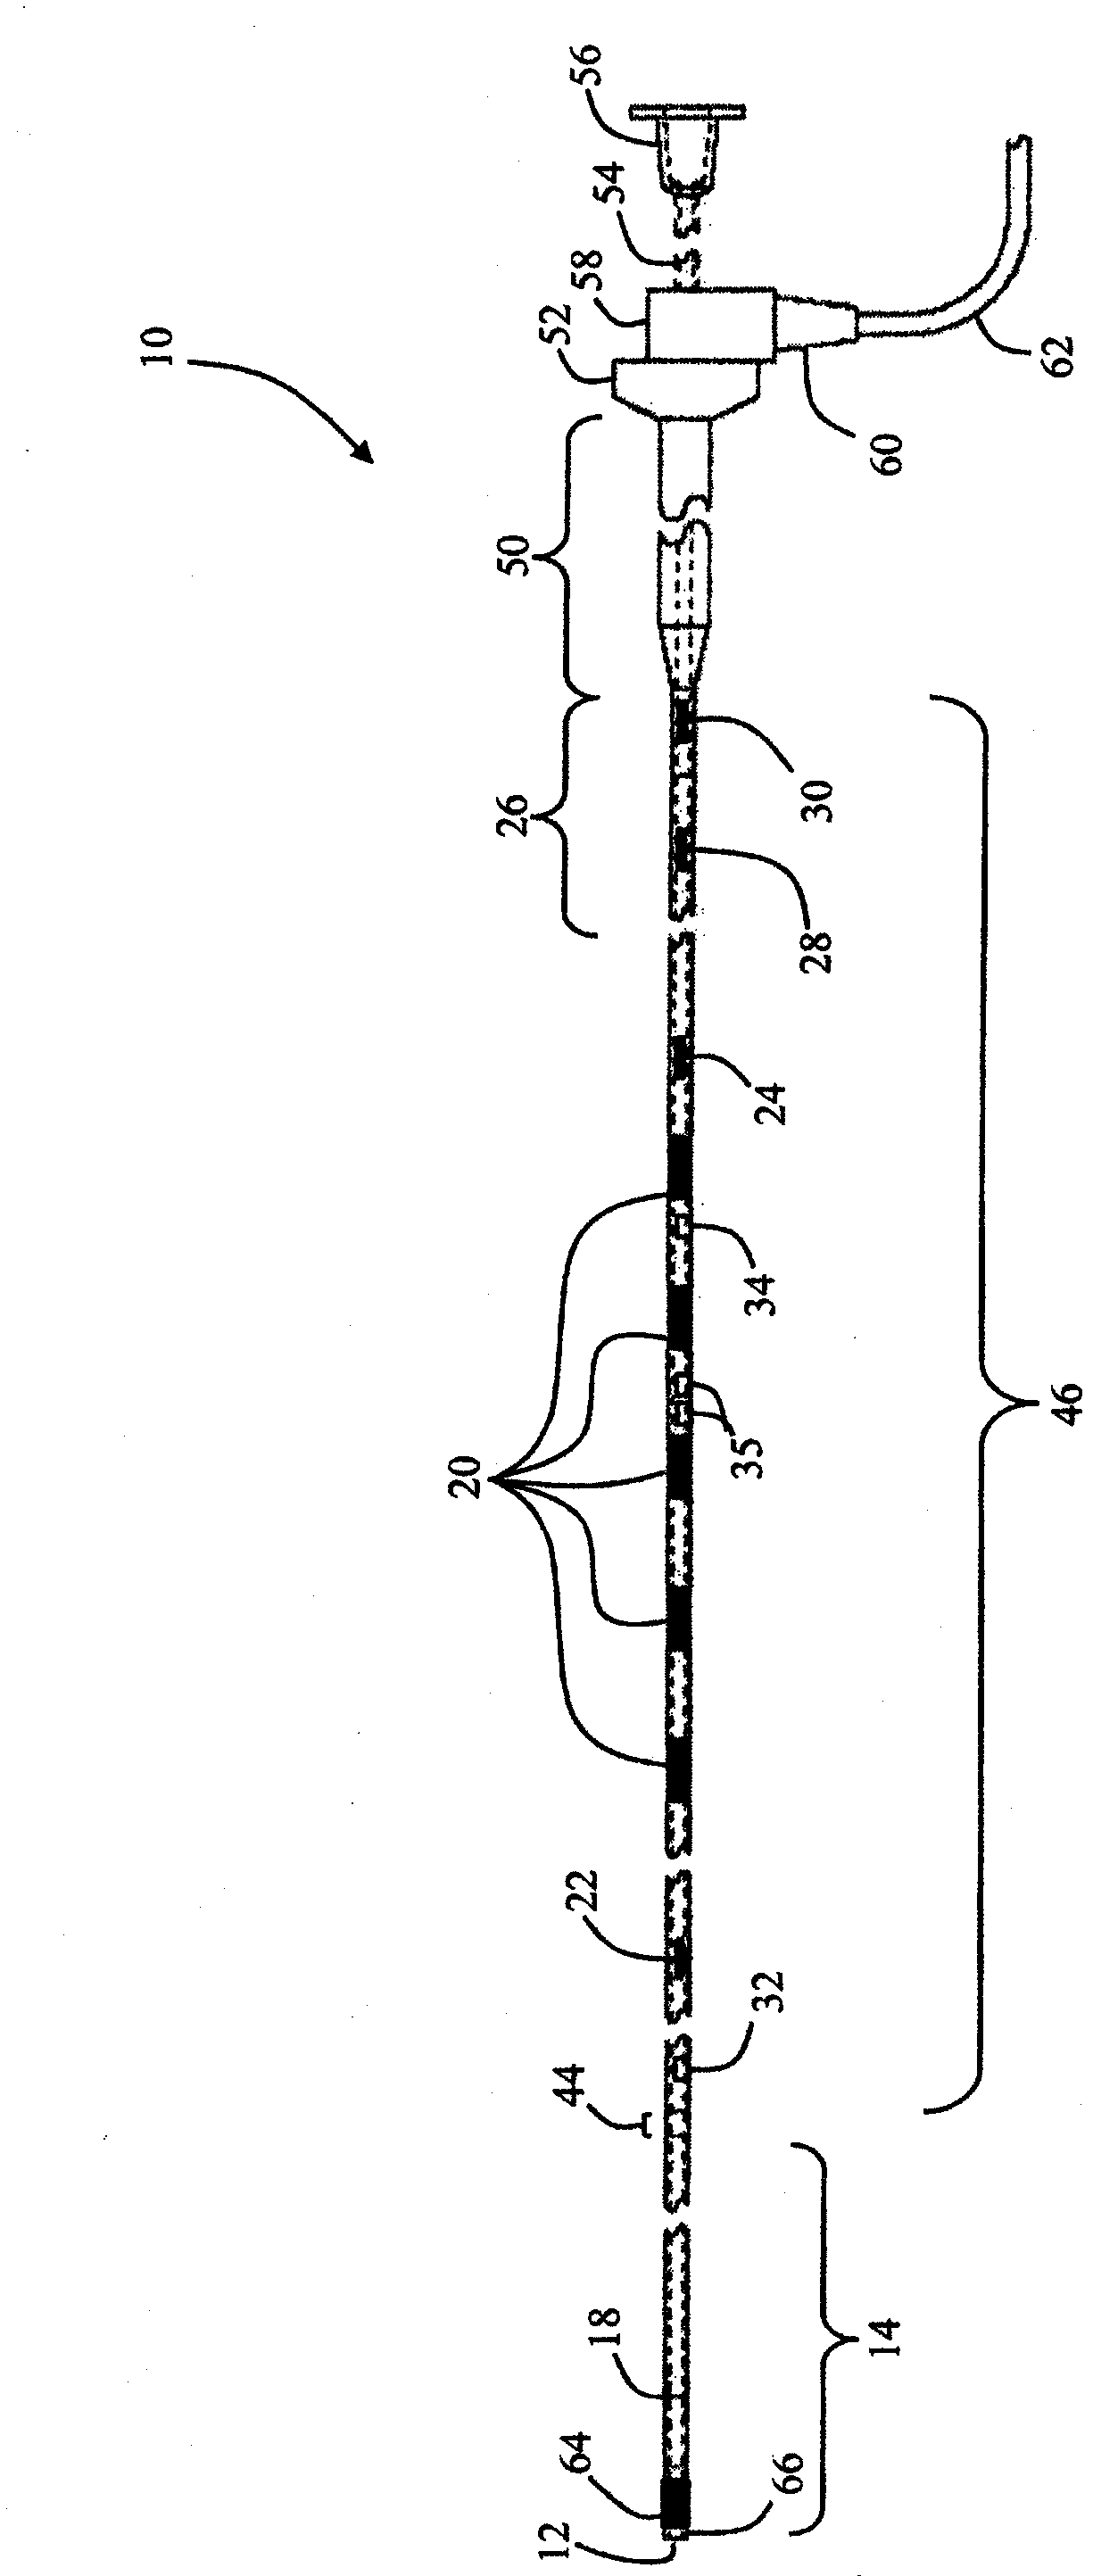 Device, apparatus and method for obtaining physiological signals by way of a feeding tube